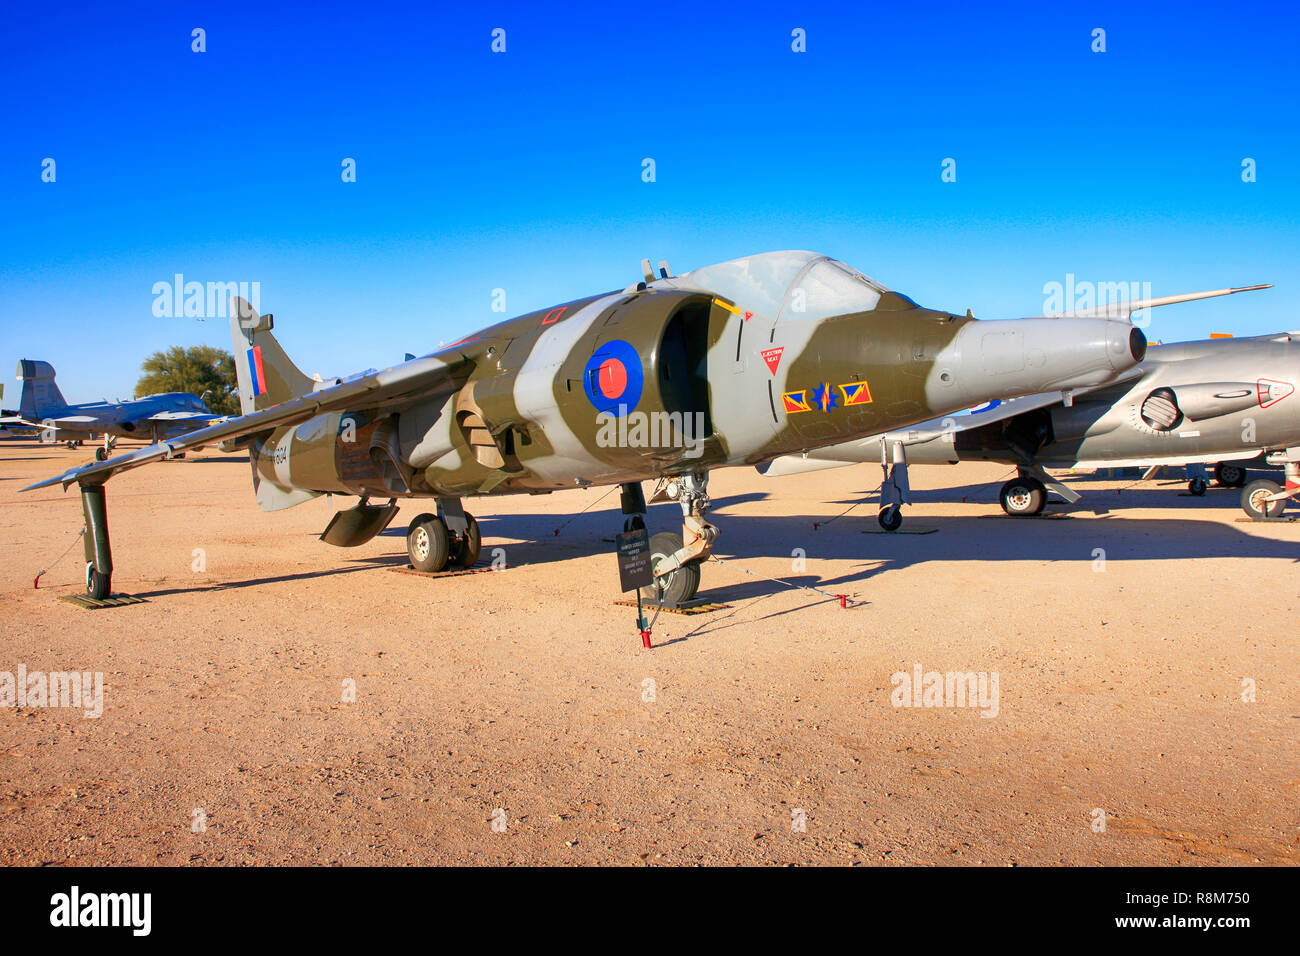 RAF Hawker Siddeley Harrier GR3 VSTOL fighter plane on display at the Pima Air & Space Museum in Tucson, AZ Stock Photo